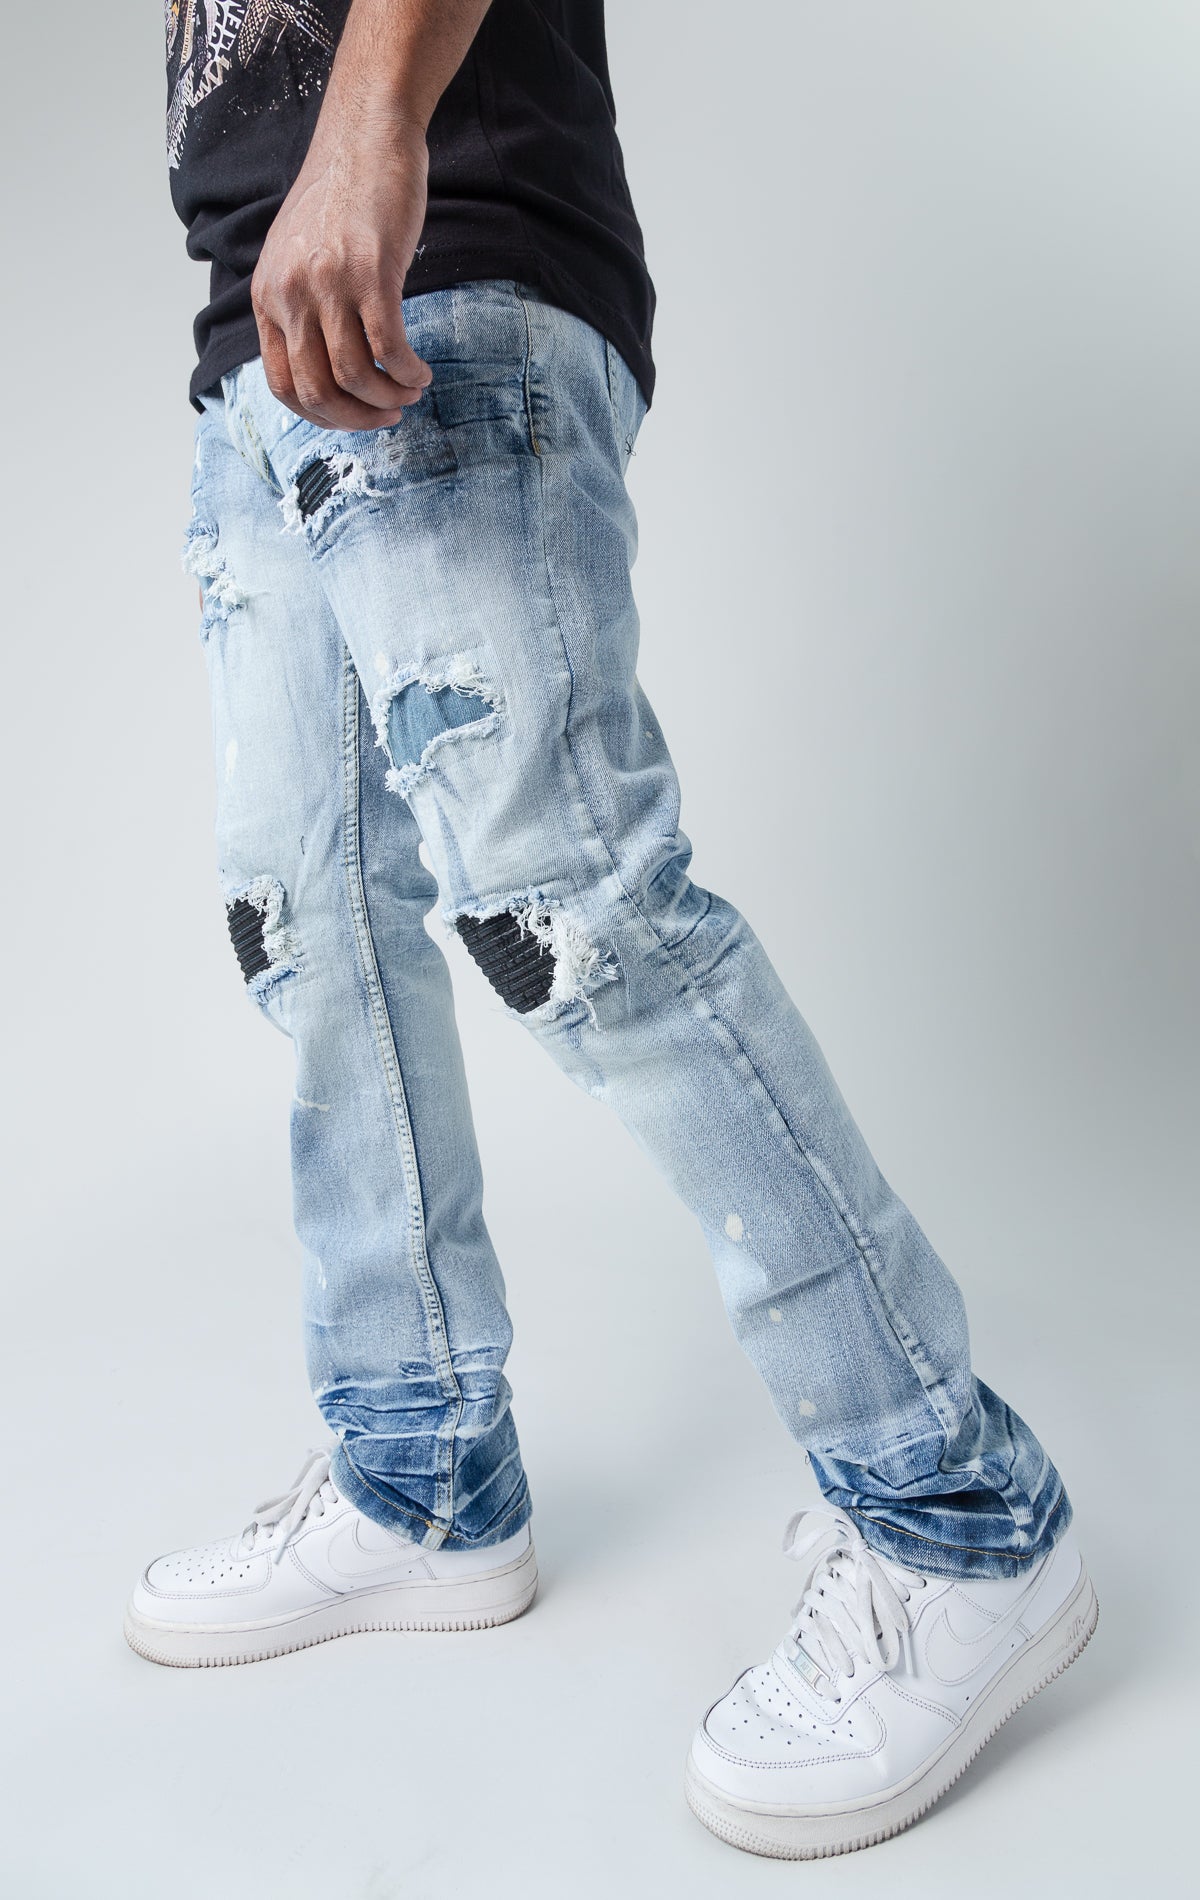 Evolution teared denim pants in ice blue and black